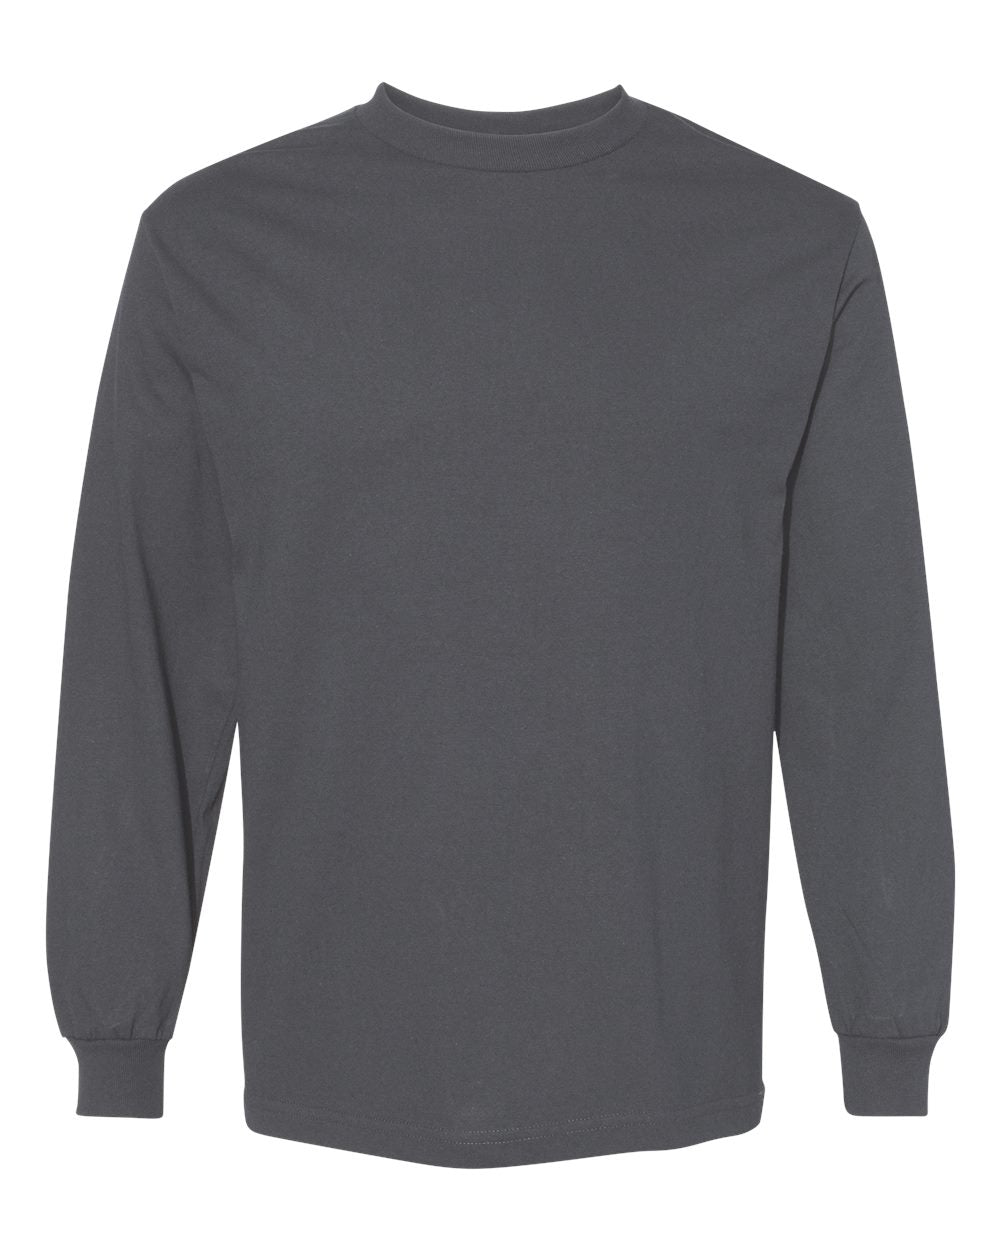 American Apparel Unisex Heavyweight Cotton Long Sleeve Tee 1304 #color_Charcoal